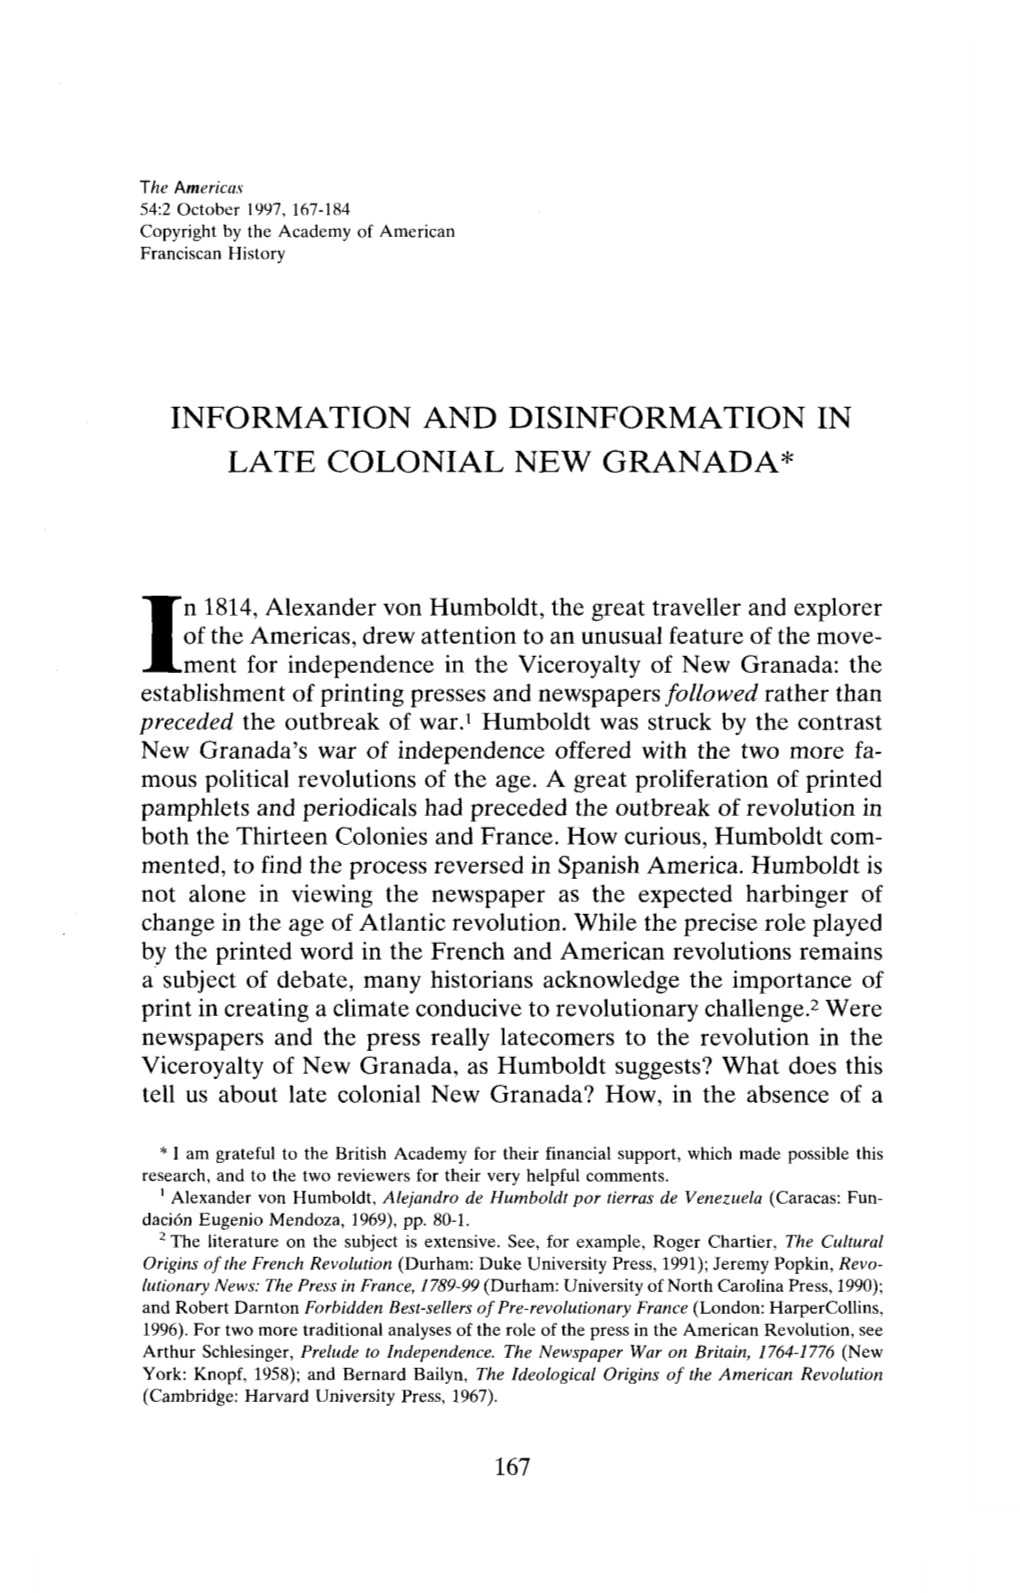 Information and Disinformation in Late Colonial New Granada*